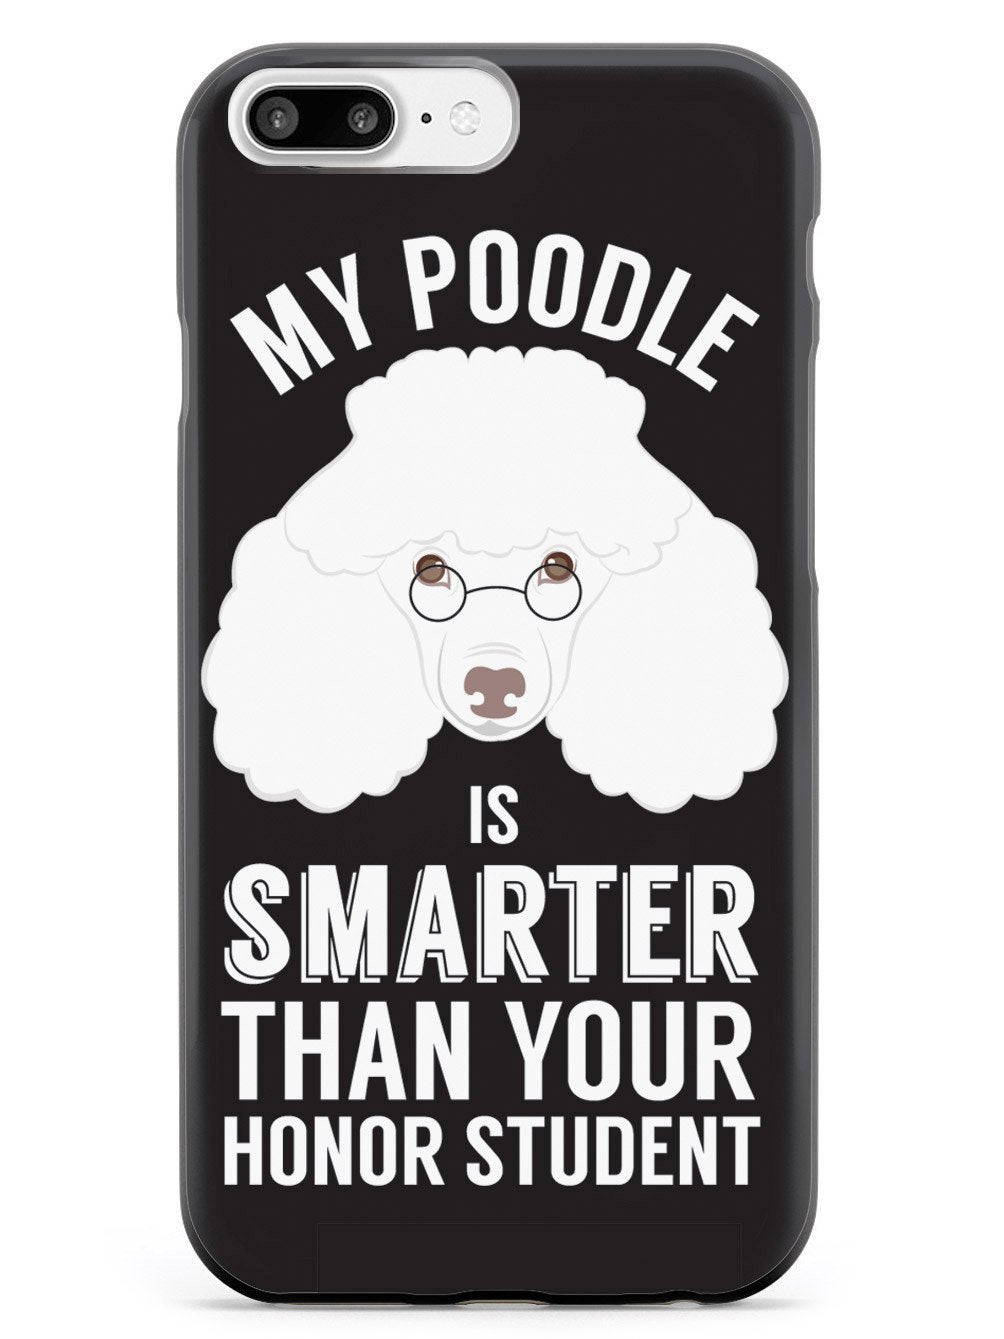 Smarter Than Your Honor Student - Poodle Case